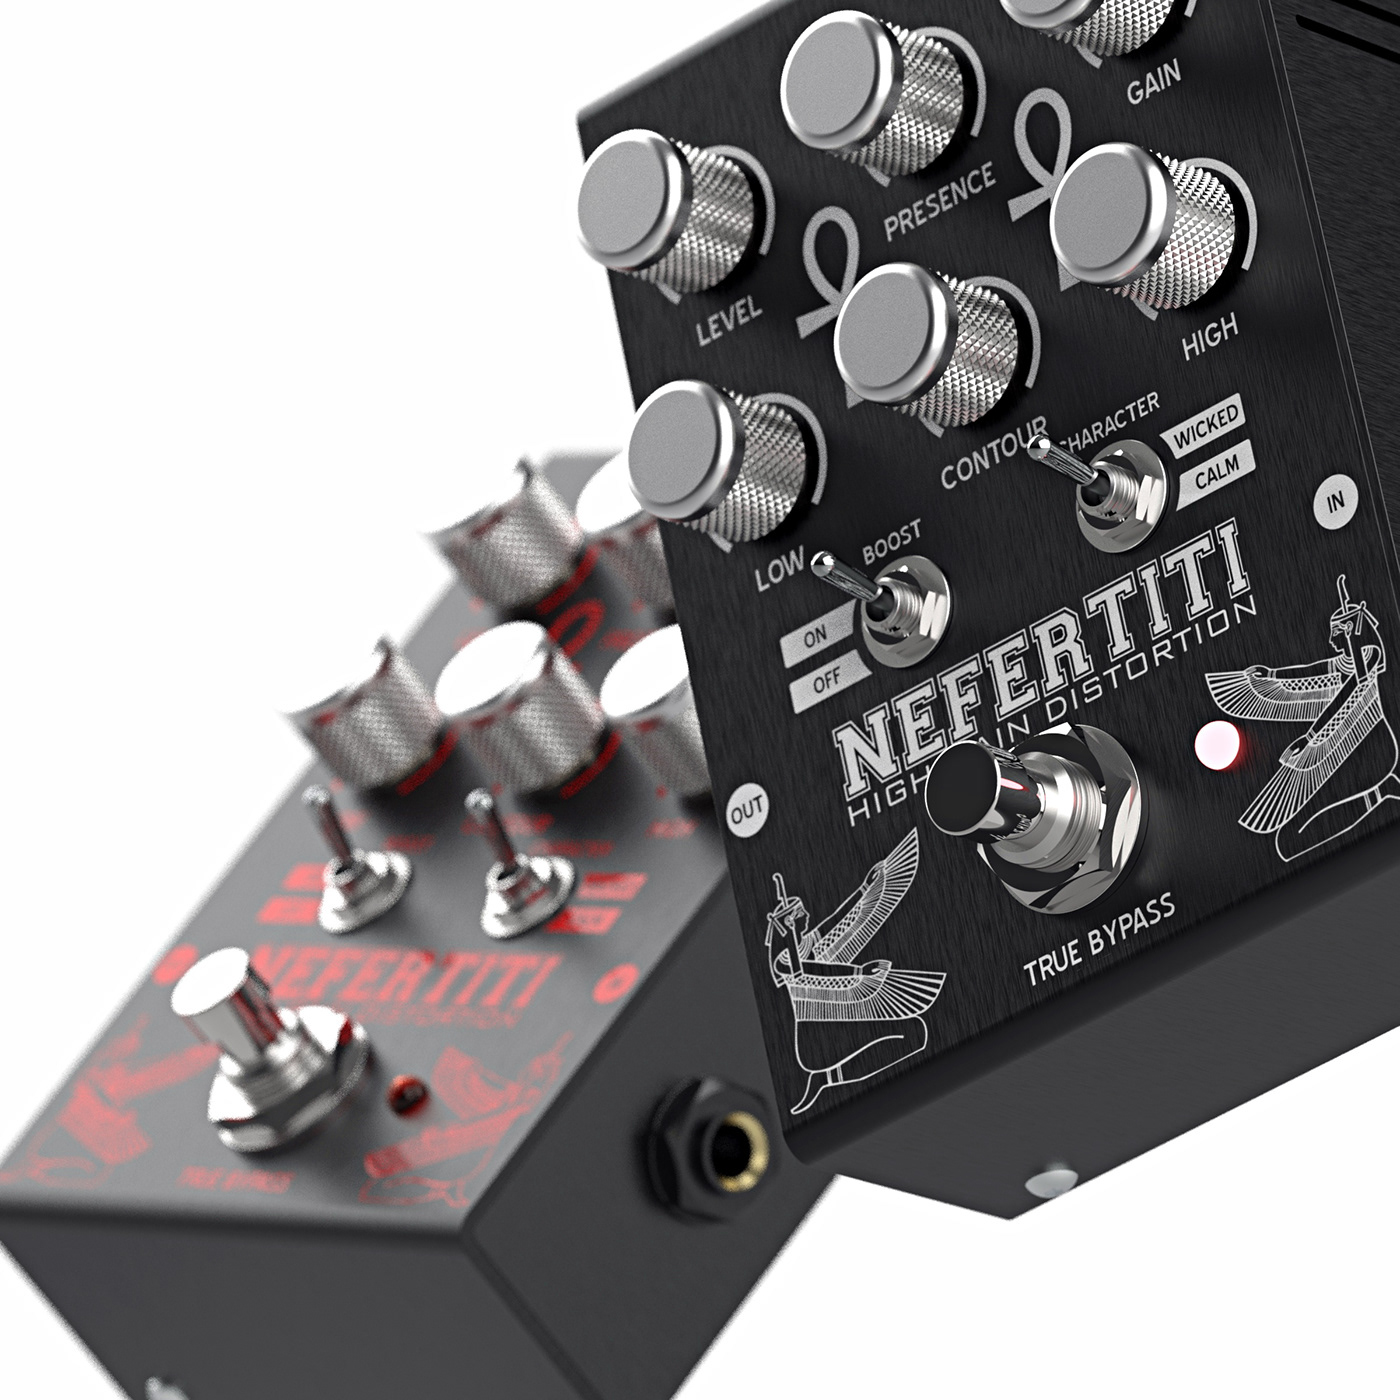 3drender guitar effects keyshot productdesign Solidworks distortion effect Guitar Pedal Overdrive PedalEffects stompbox